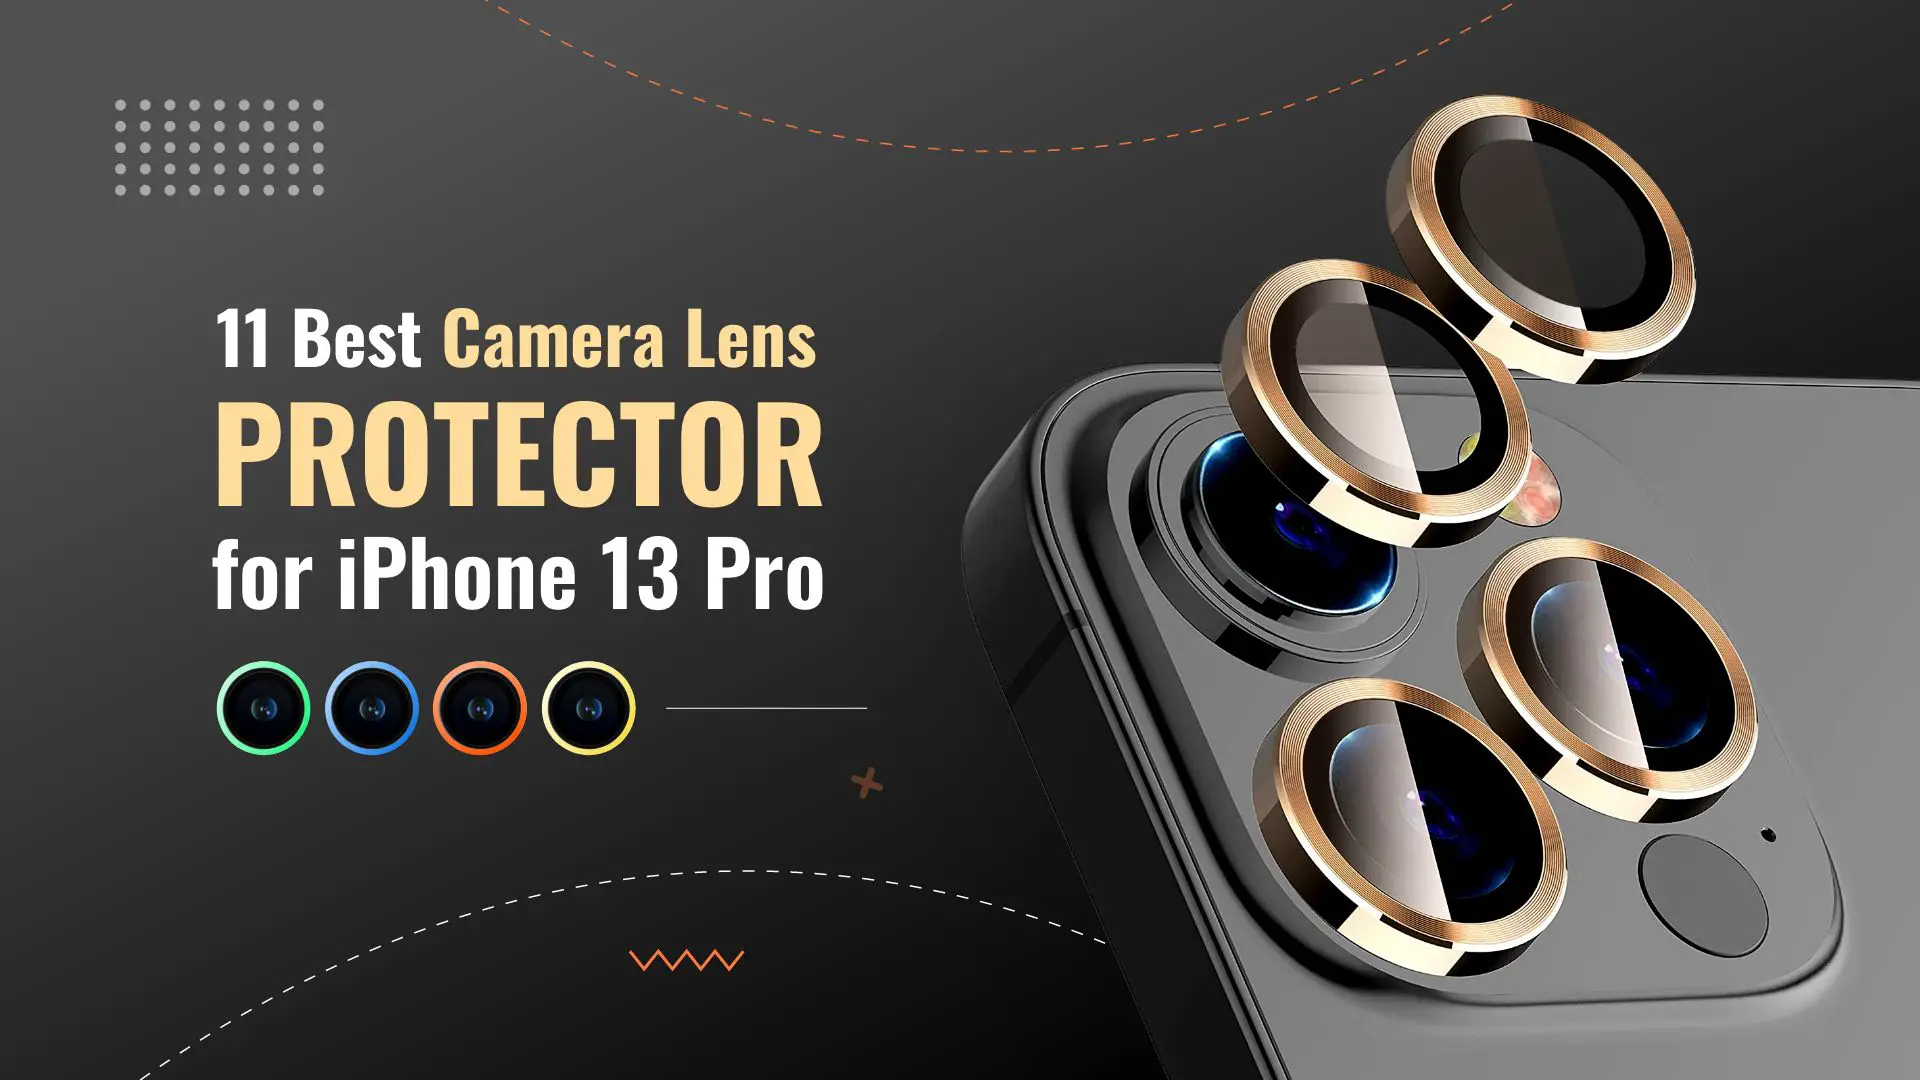 11 Best Camera Lens Protector for iPhone 13 Pro and Pro Max in 2022